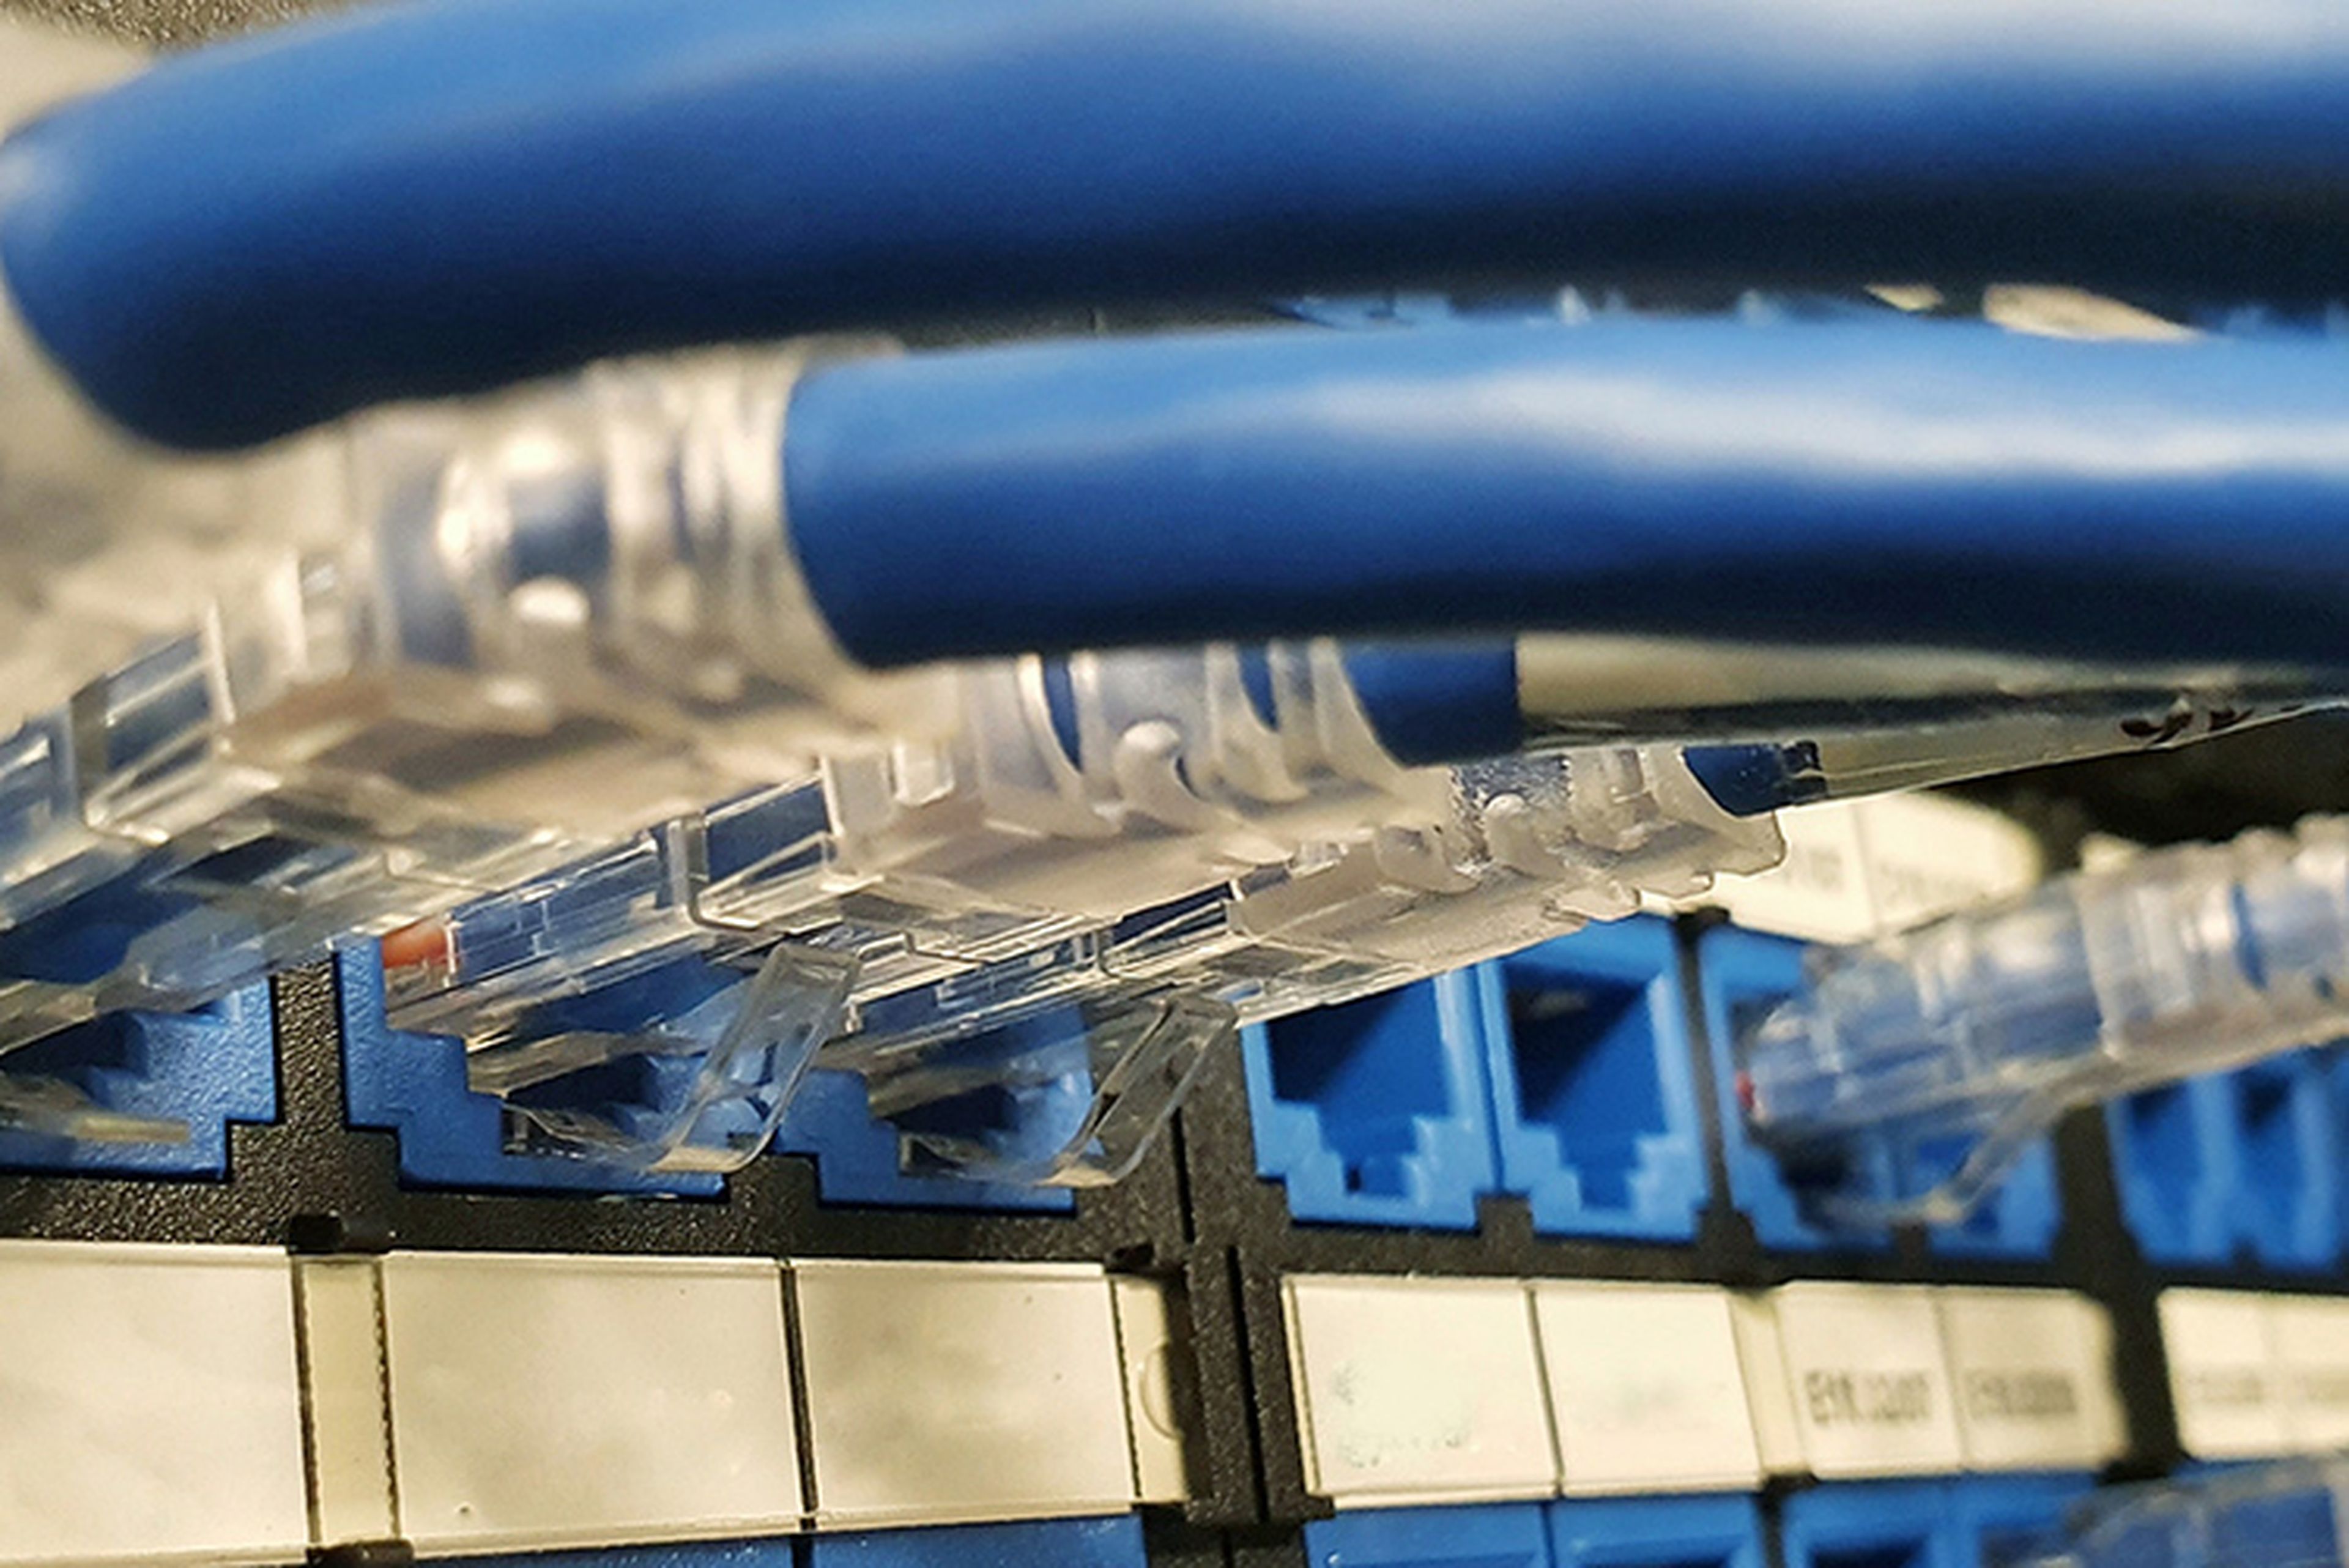 Network cables attached to network patch panel in datacenter